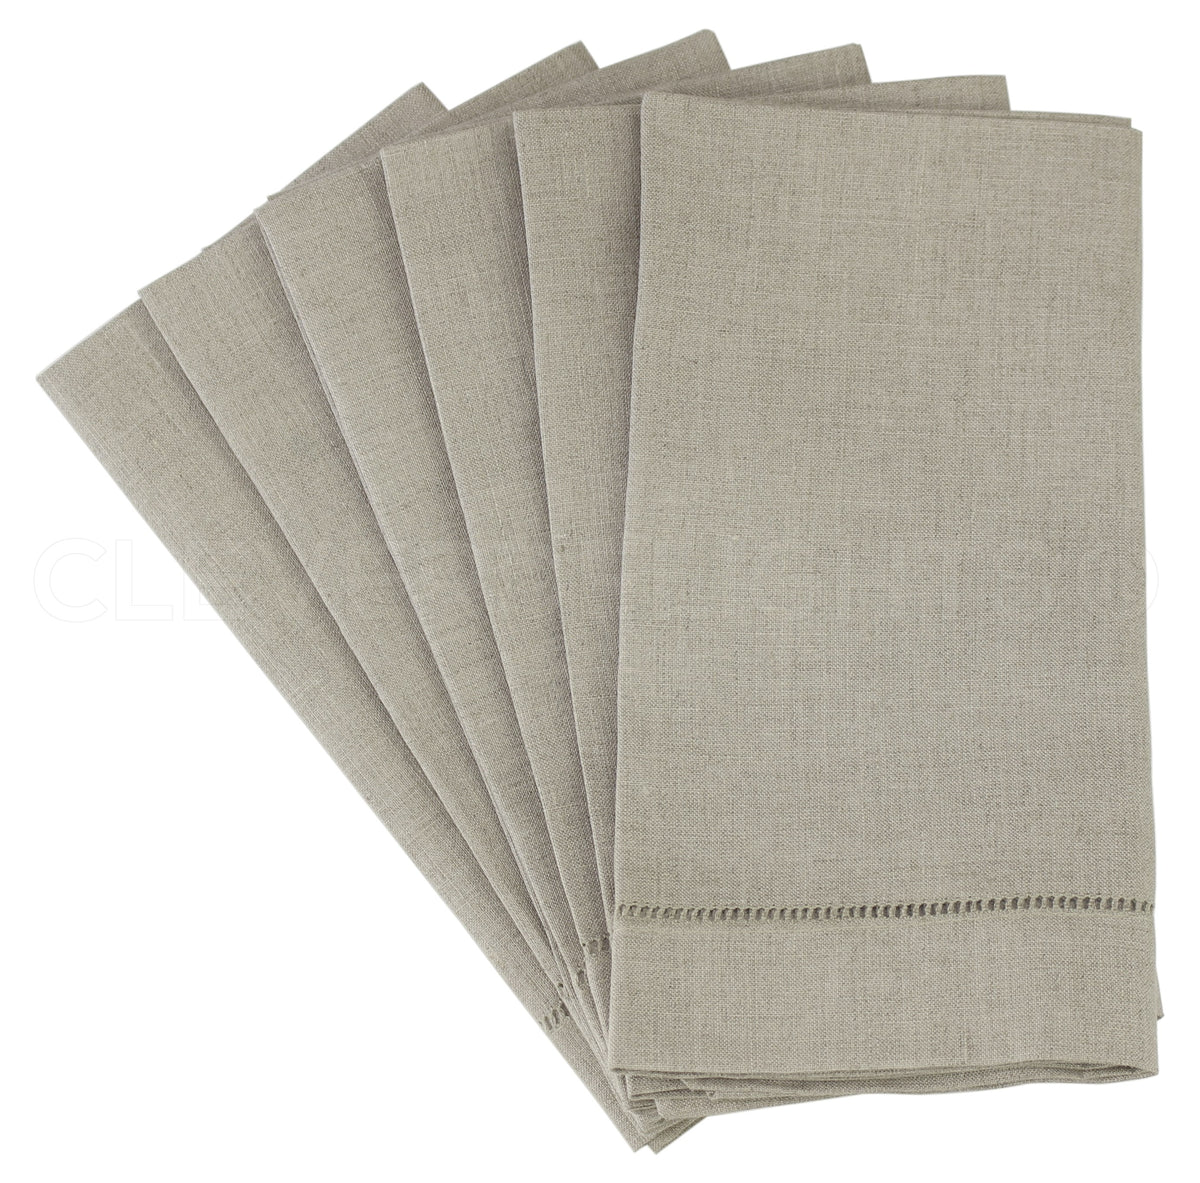 12-Pack Hemstitched Dinner Napkins Oversized 20x20 - Flax-Cotton Fabric  Tailored with Mitered Corner - Ideal for Events and Regular Use - Natural